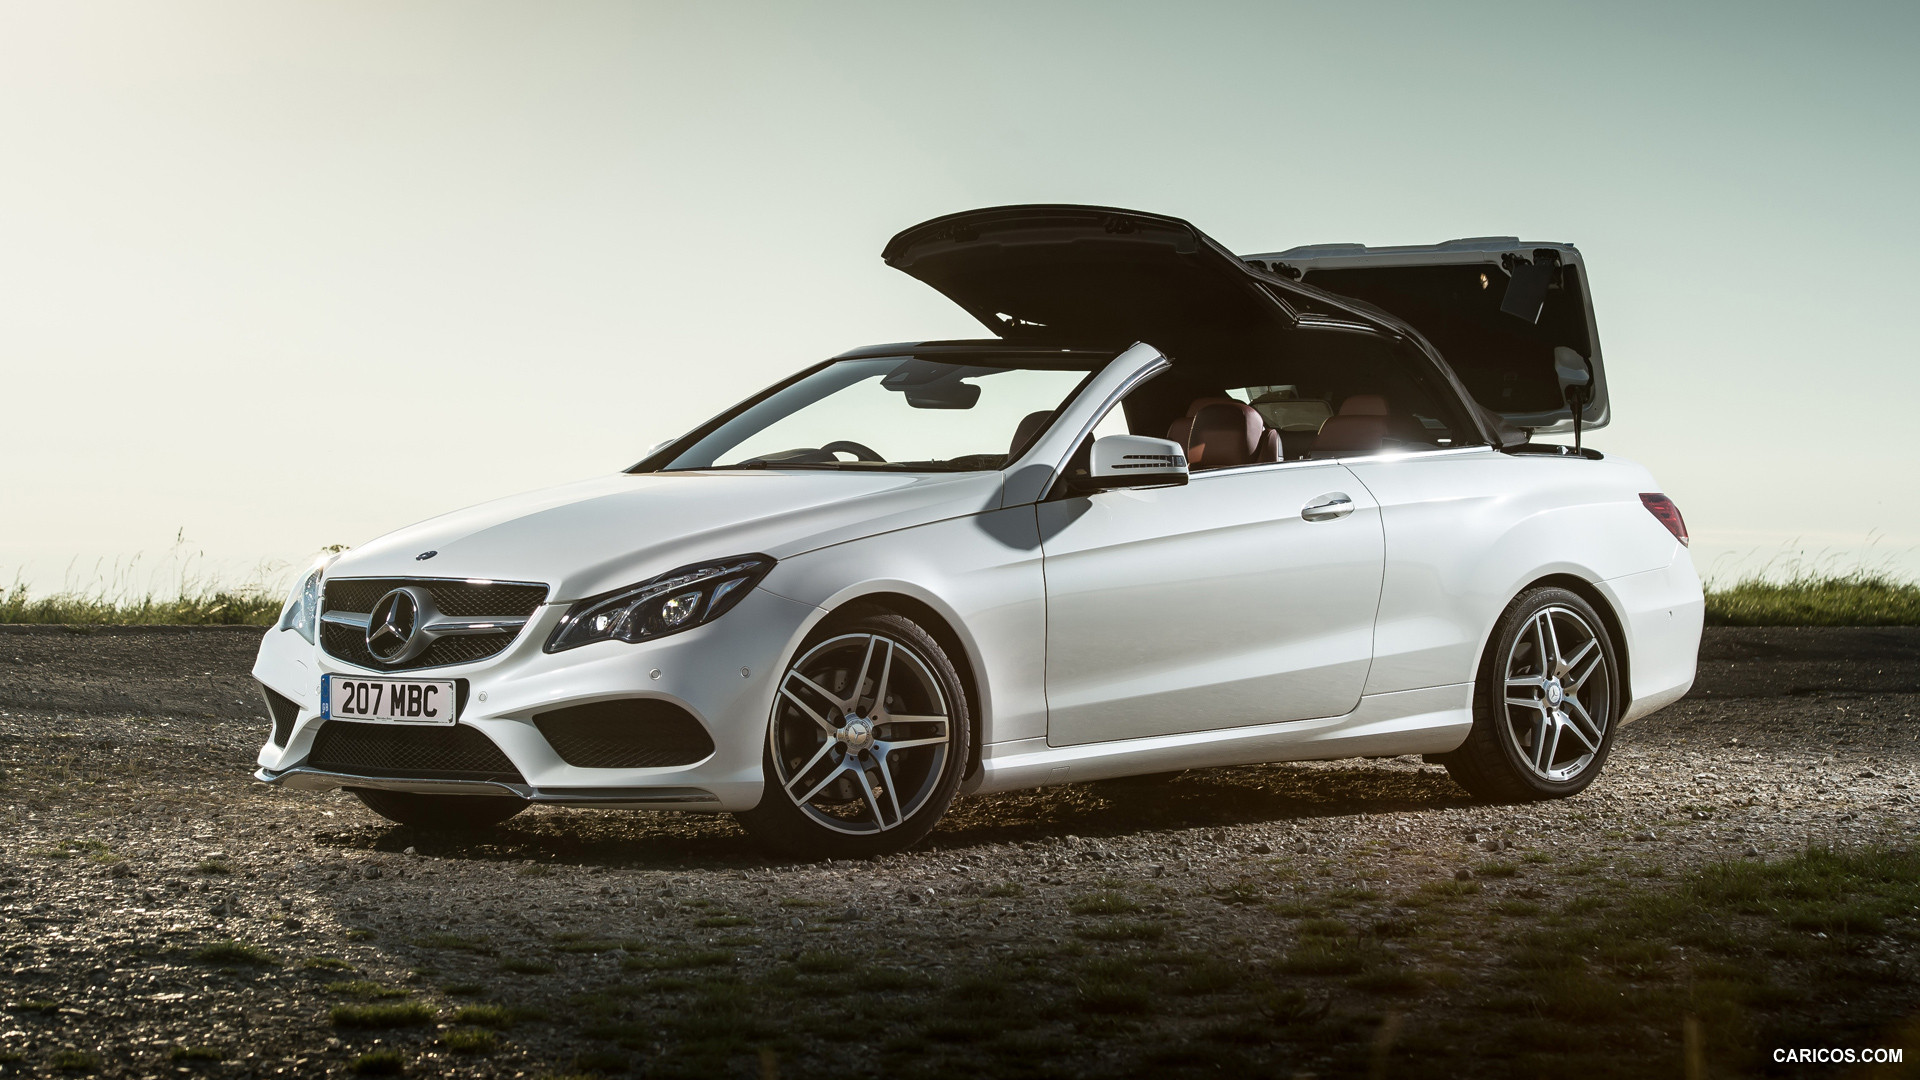 2014 Mercedes-Benz E-Class Cabriolet (UK-Version) - Top In Action - Side, #10 of 15